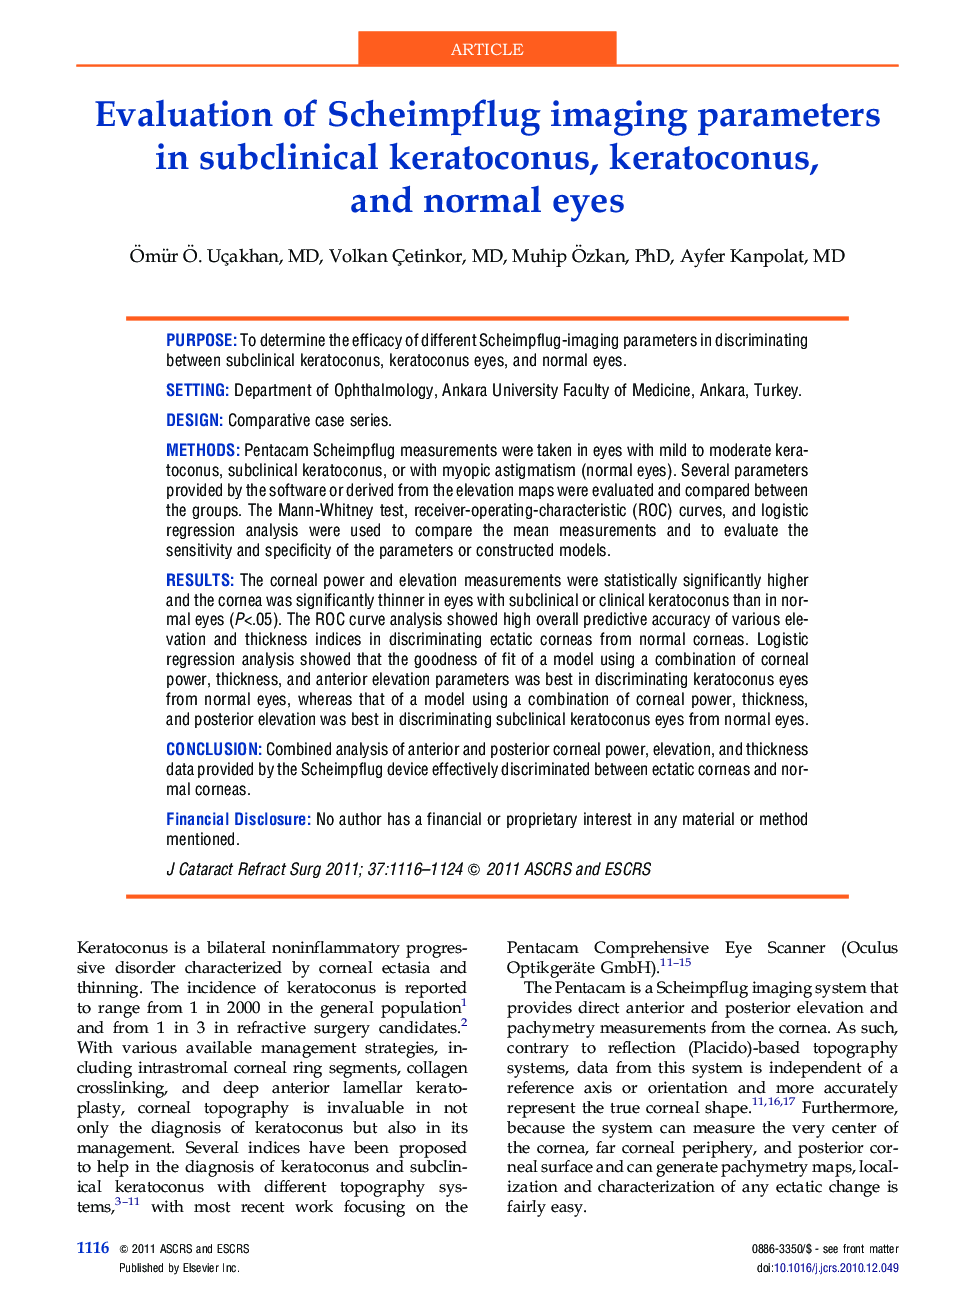 Evaluation of Scheimpflug imaging parameters in subclinical keratoconus, keratoconus, and normal eyes